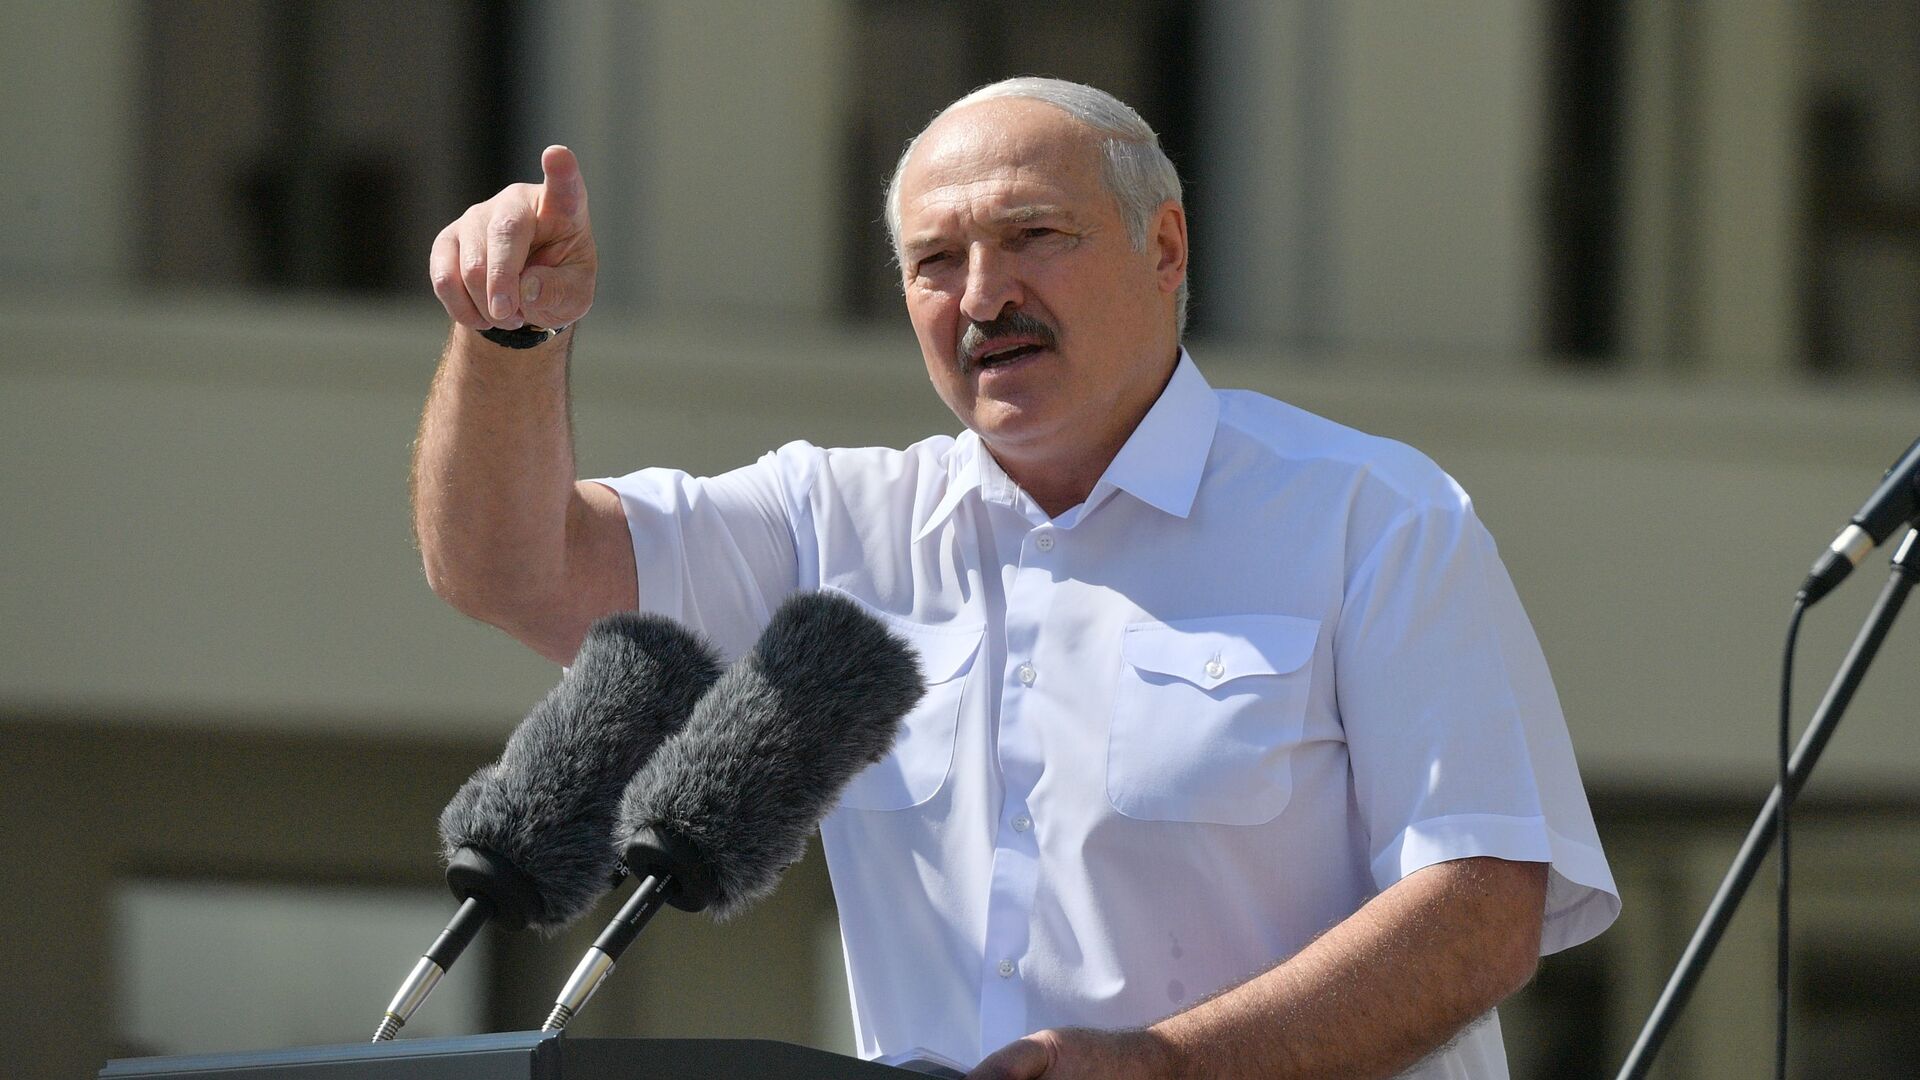 Belarusian President Alexander Lukashenko gestures as he delivers a speech during a rally of his supporters near the Government House in Independence Square in Minsk, Belarus August 16, 2020 - Sputnik International, 1920, 06.02.2022